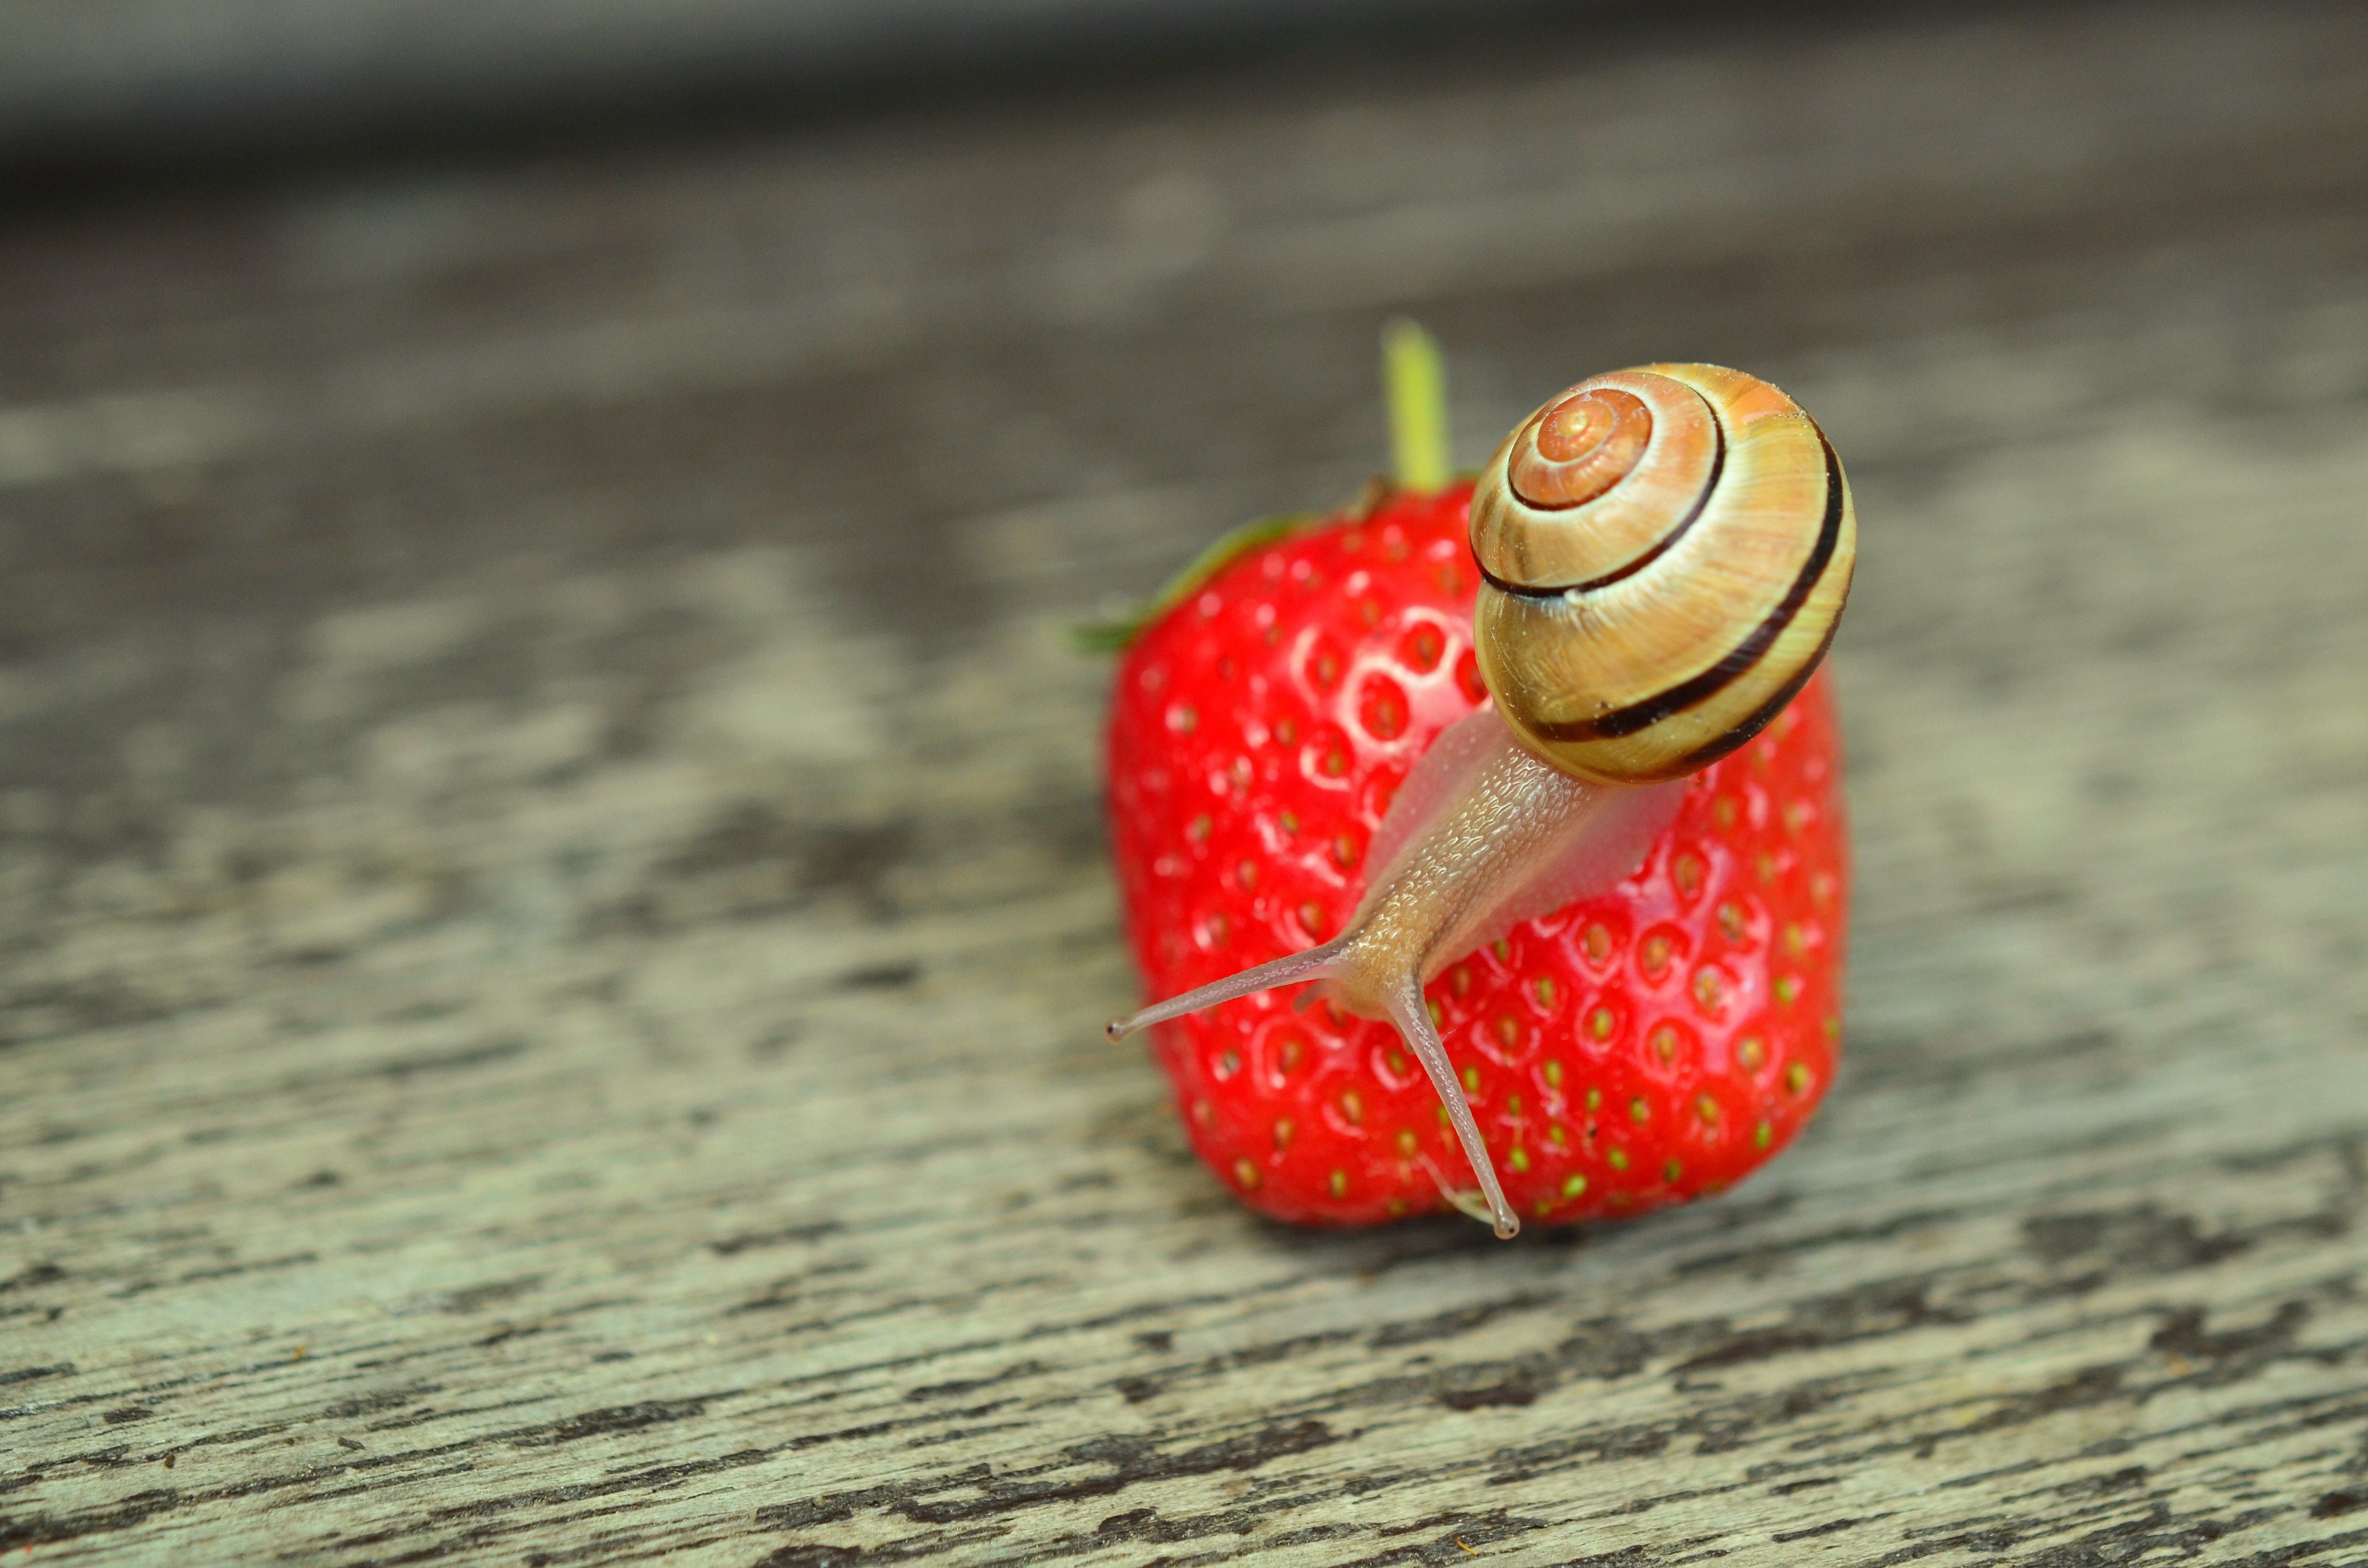 Snail on the strawberry photo